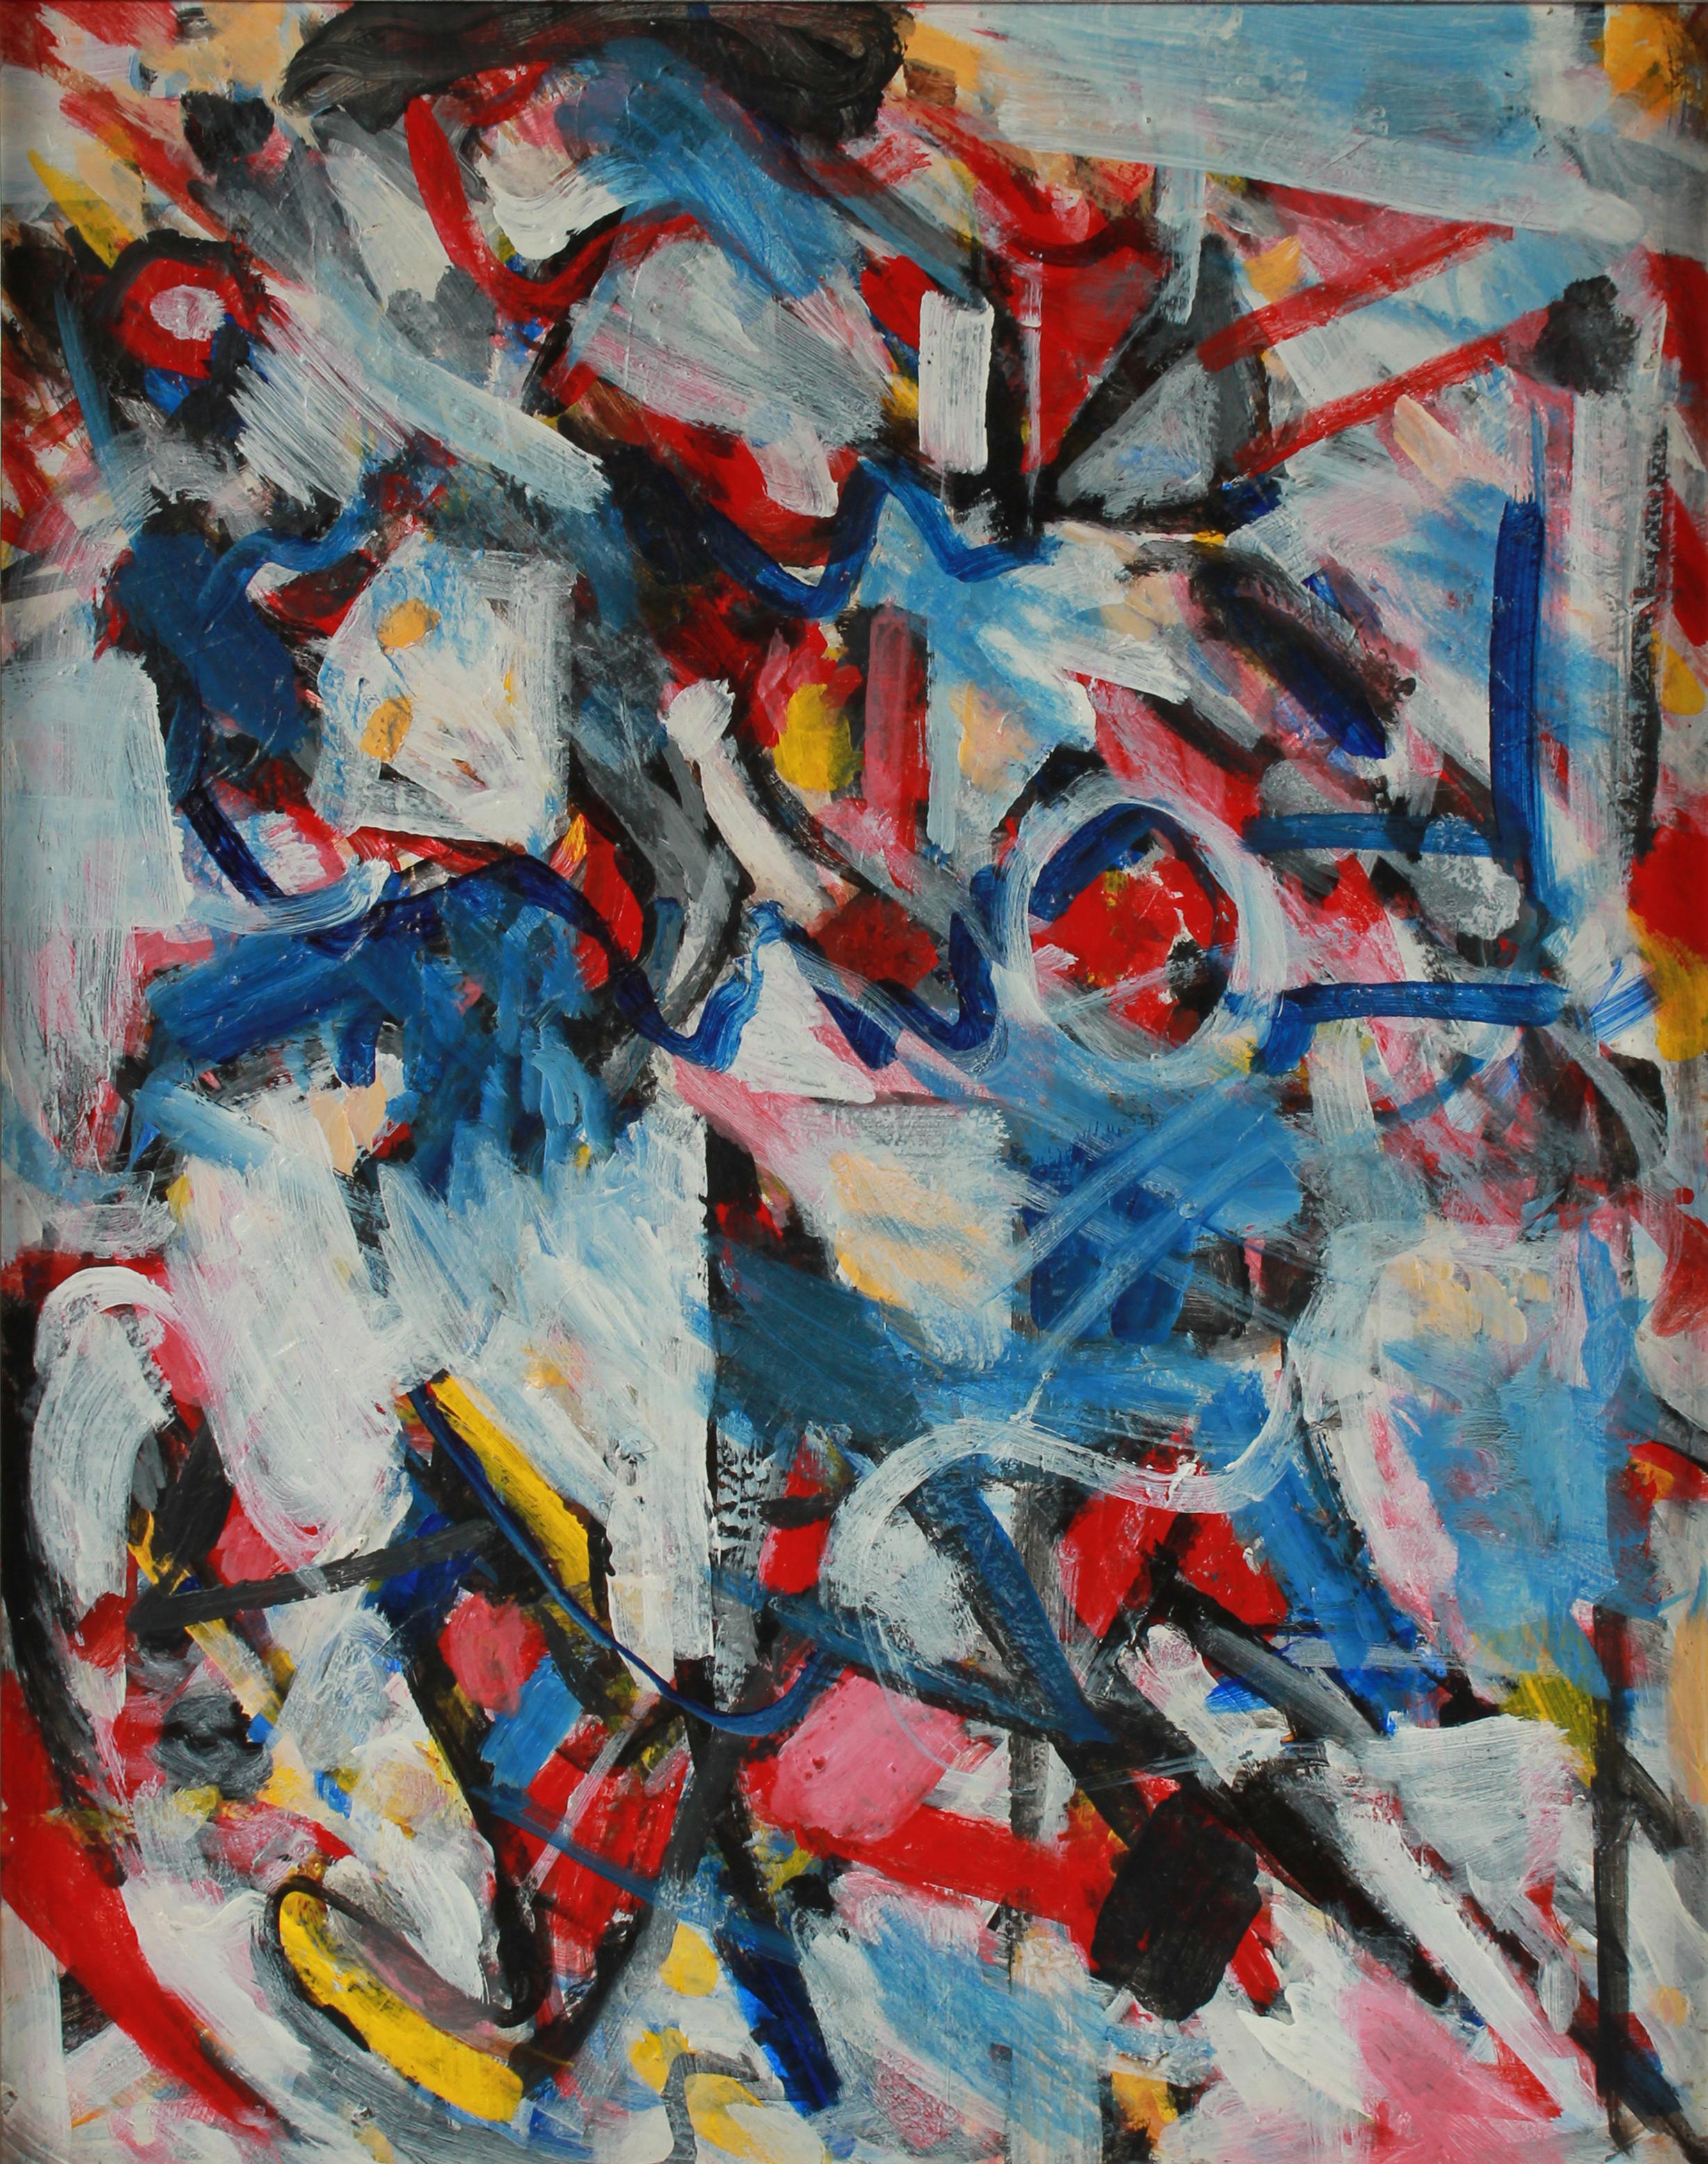 Bold Abstract Expressionist Painting in Primary Colors, Acrylic, Early 2000s - Art by Richard Caldwell Brewer